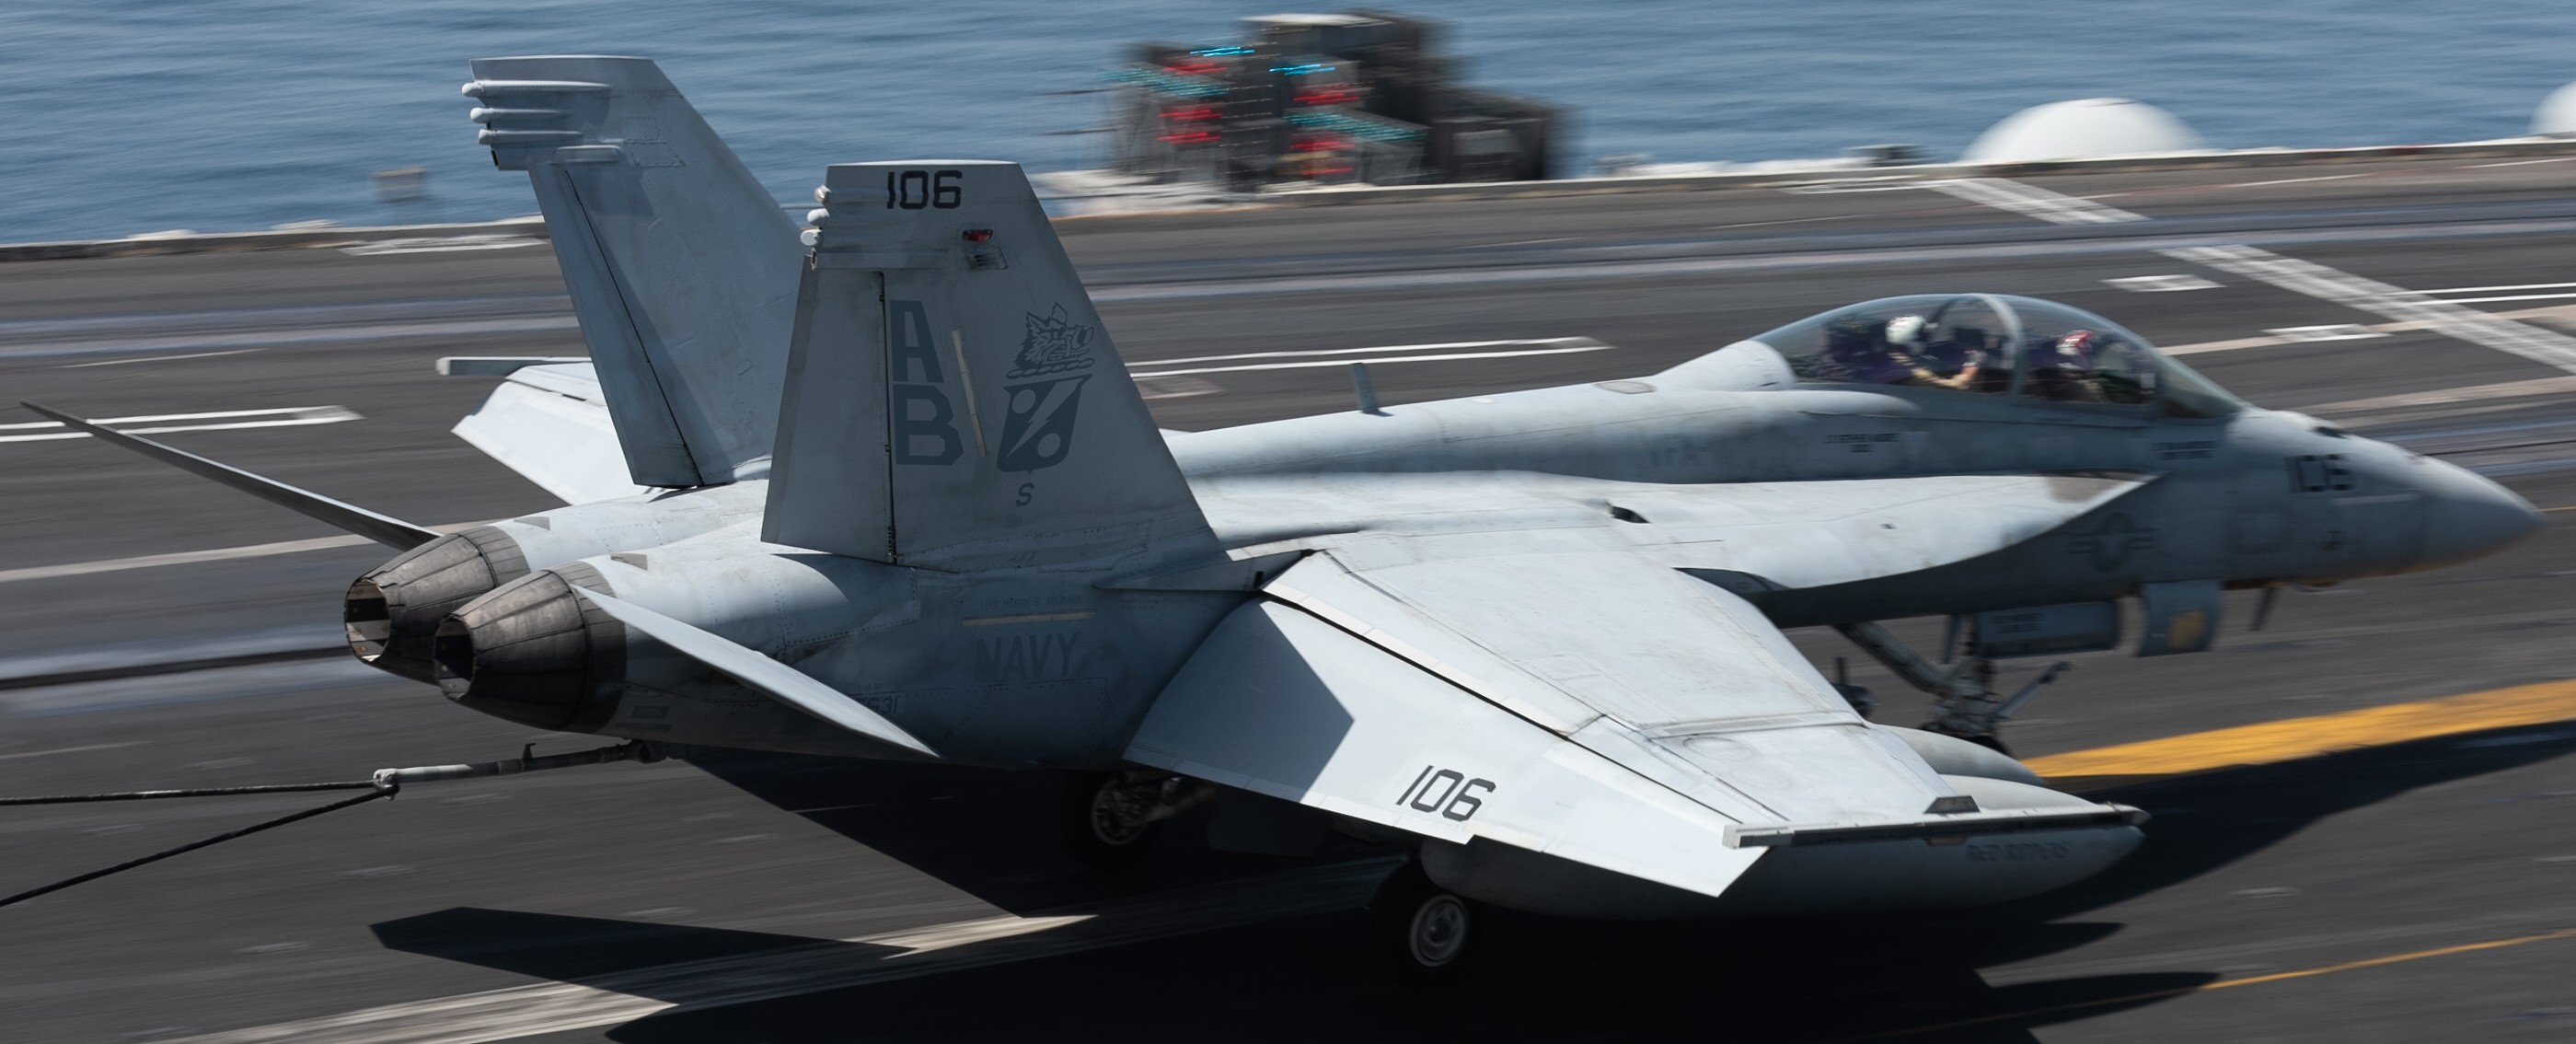 vfa-11 red rippers strike fighter squadron us navy f/a-18f super hornet carrier air wing cvw-1 uss harry s. truman cvn-75 landing